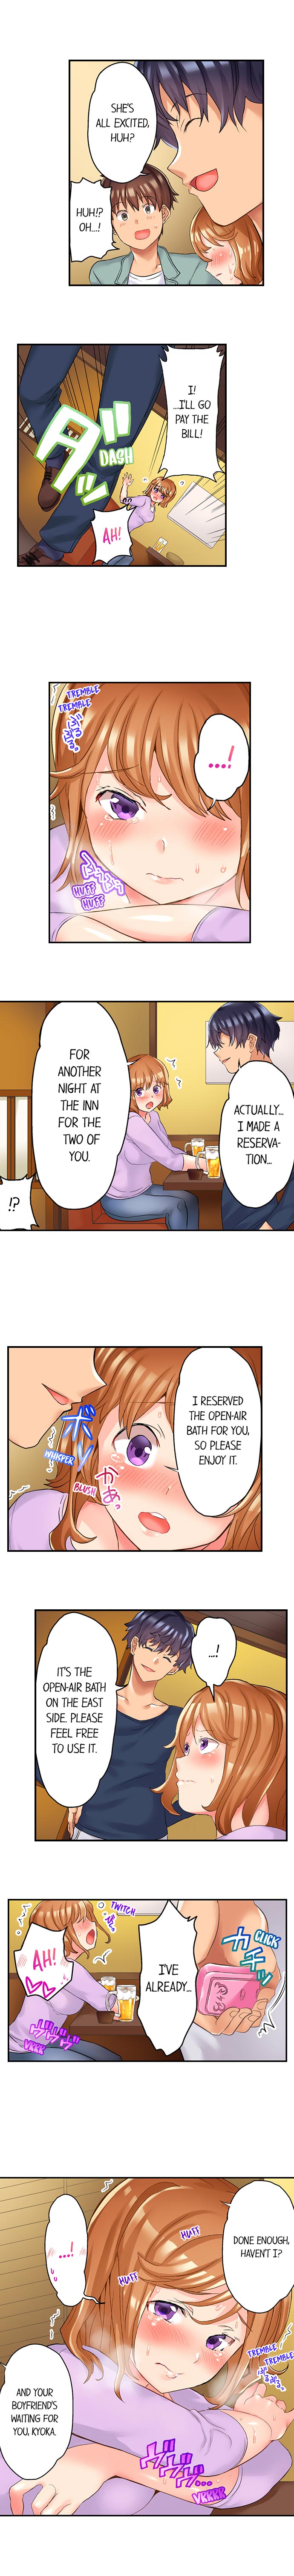 NTR Massage - Chapter 8 Page 2